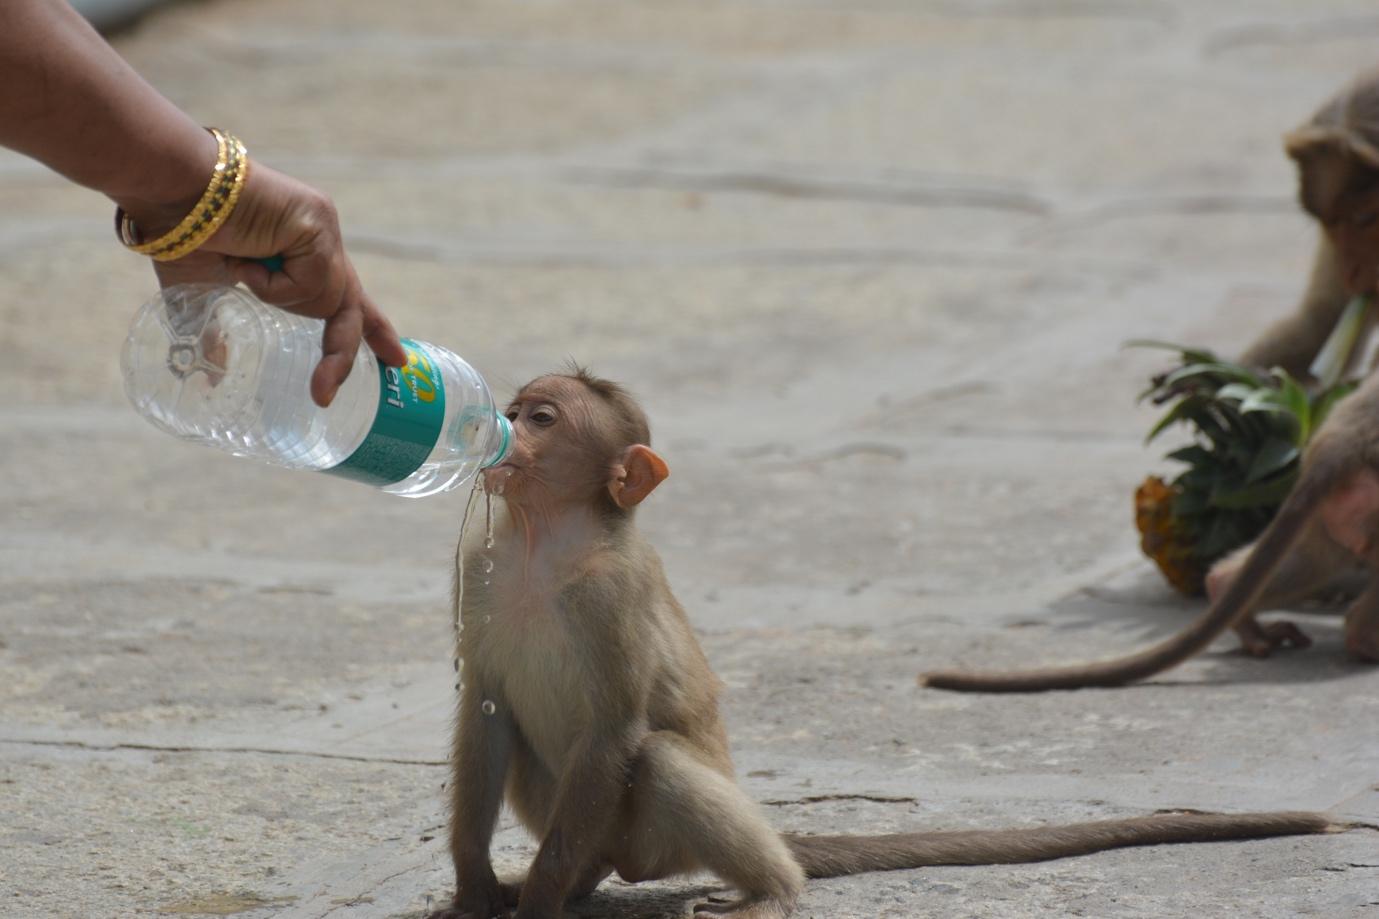 Absence of human presence impacting monkey behaviour in Ayodhya during lockdown